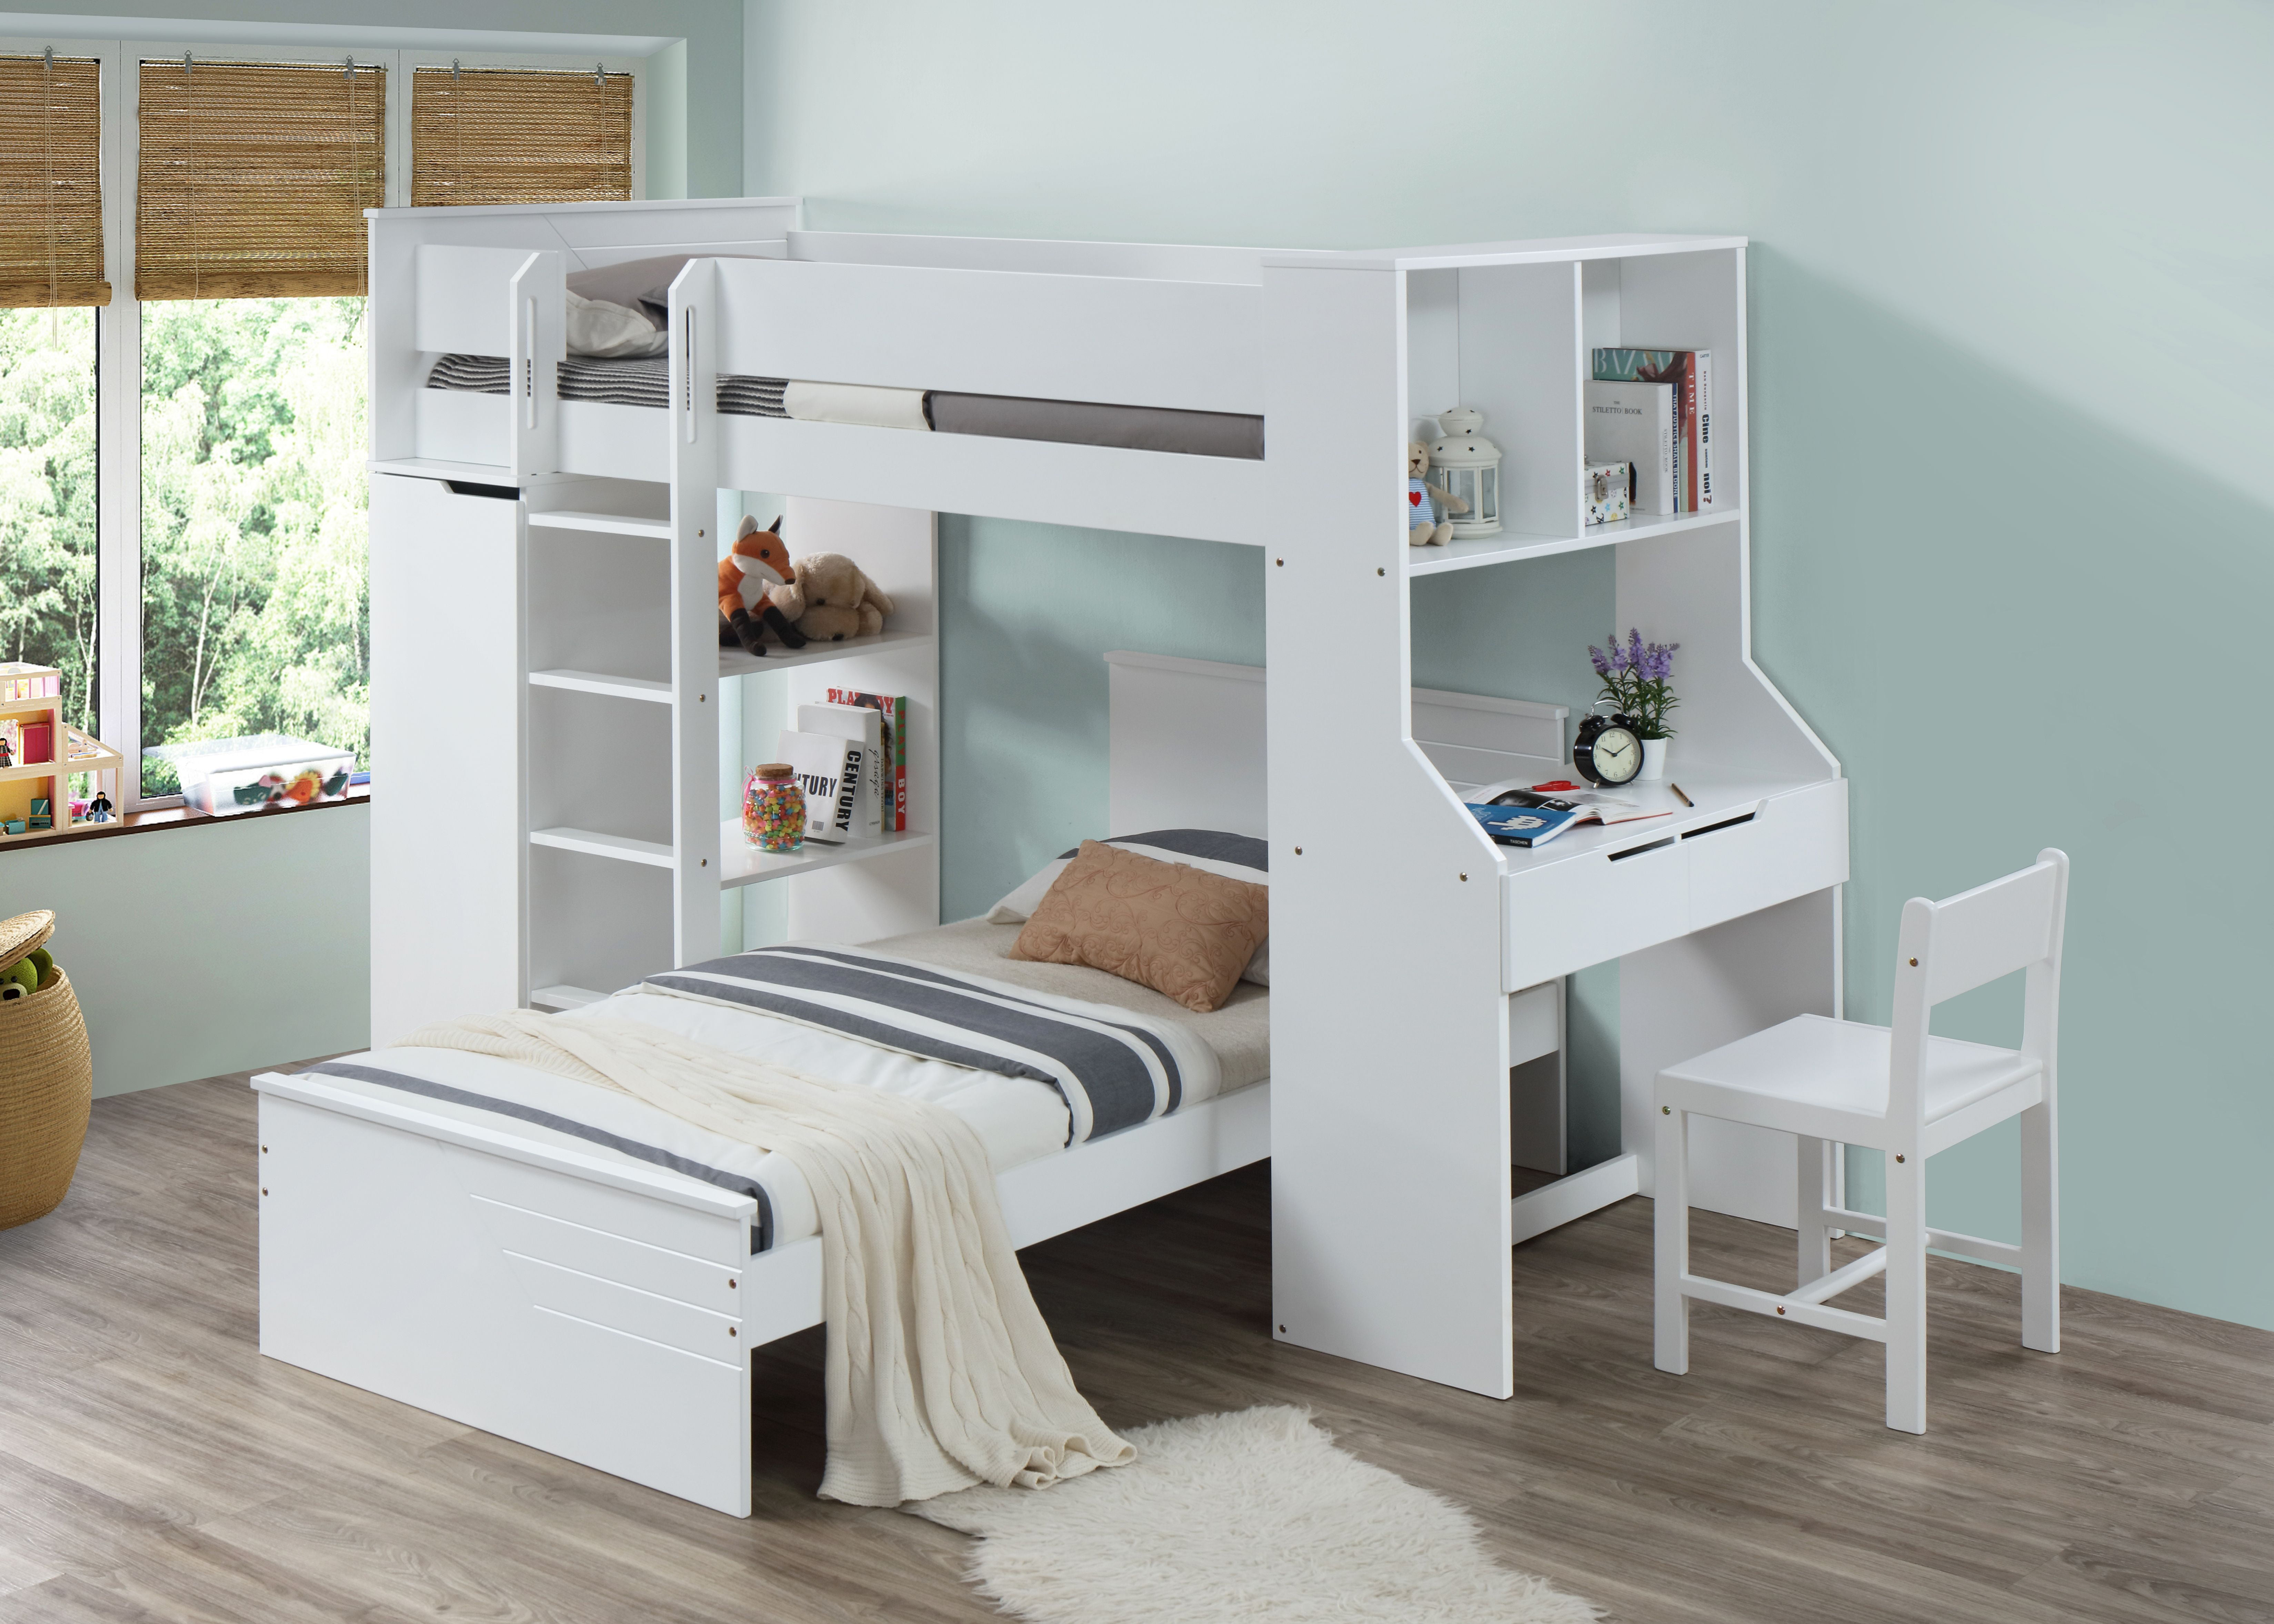 Acme Furniture Nerice Twin Loft Bed, Bunk Bed With Closet And Desk